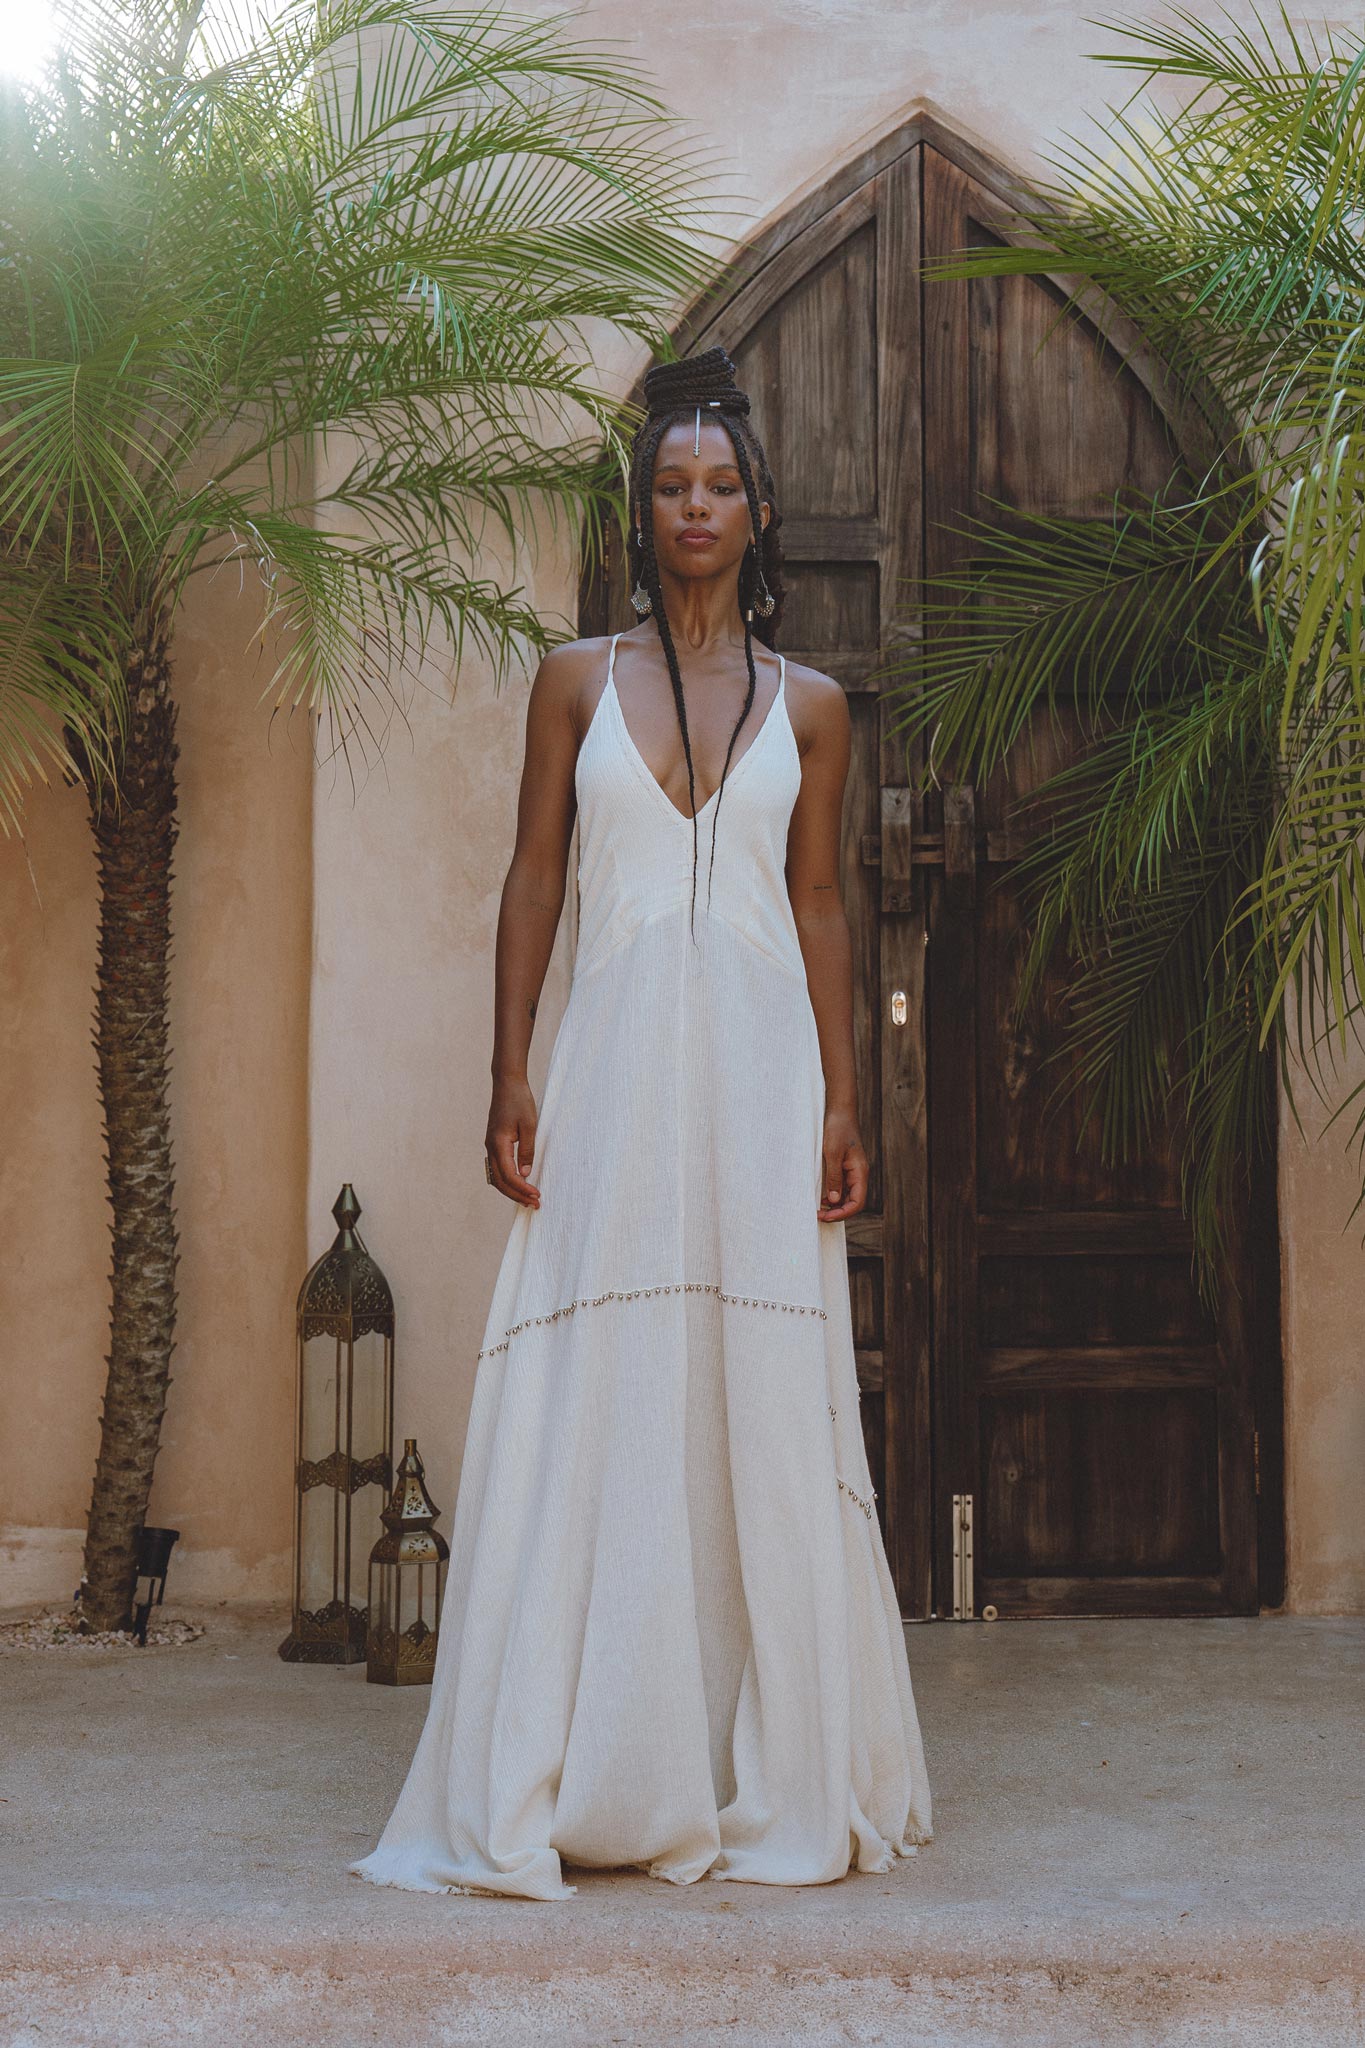 First Look: Stunning New Gowns From White by Vera Wang | BridalGuide